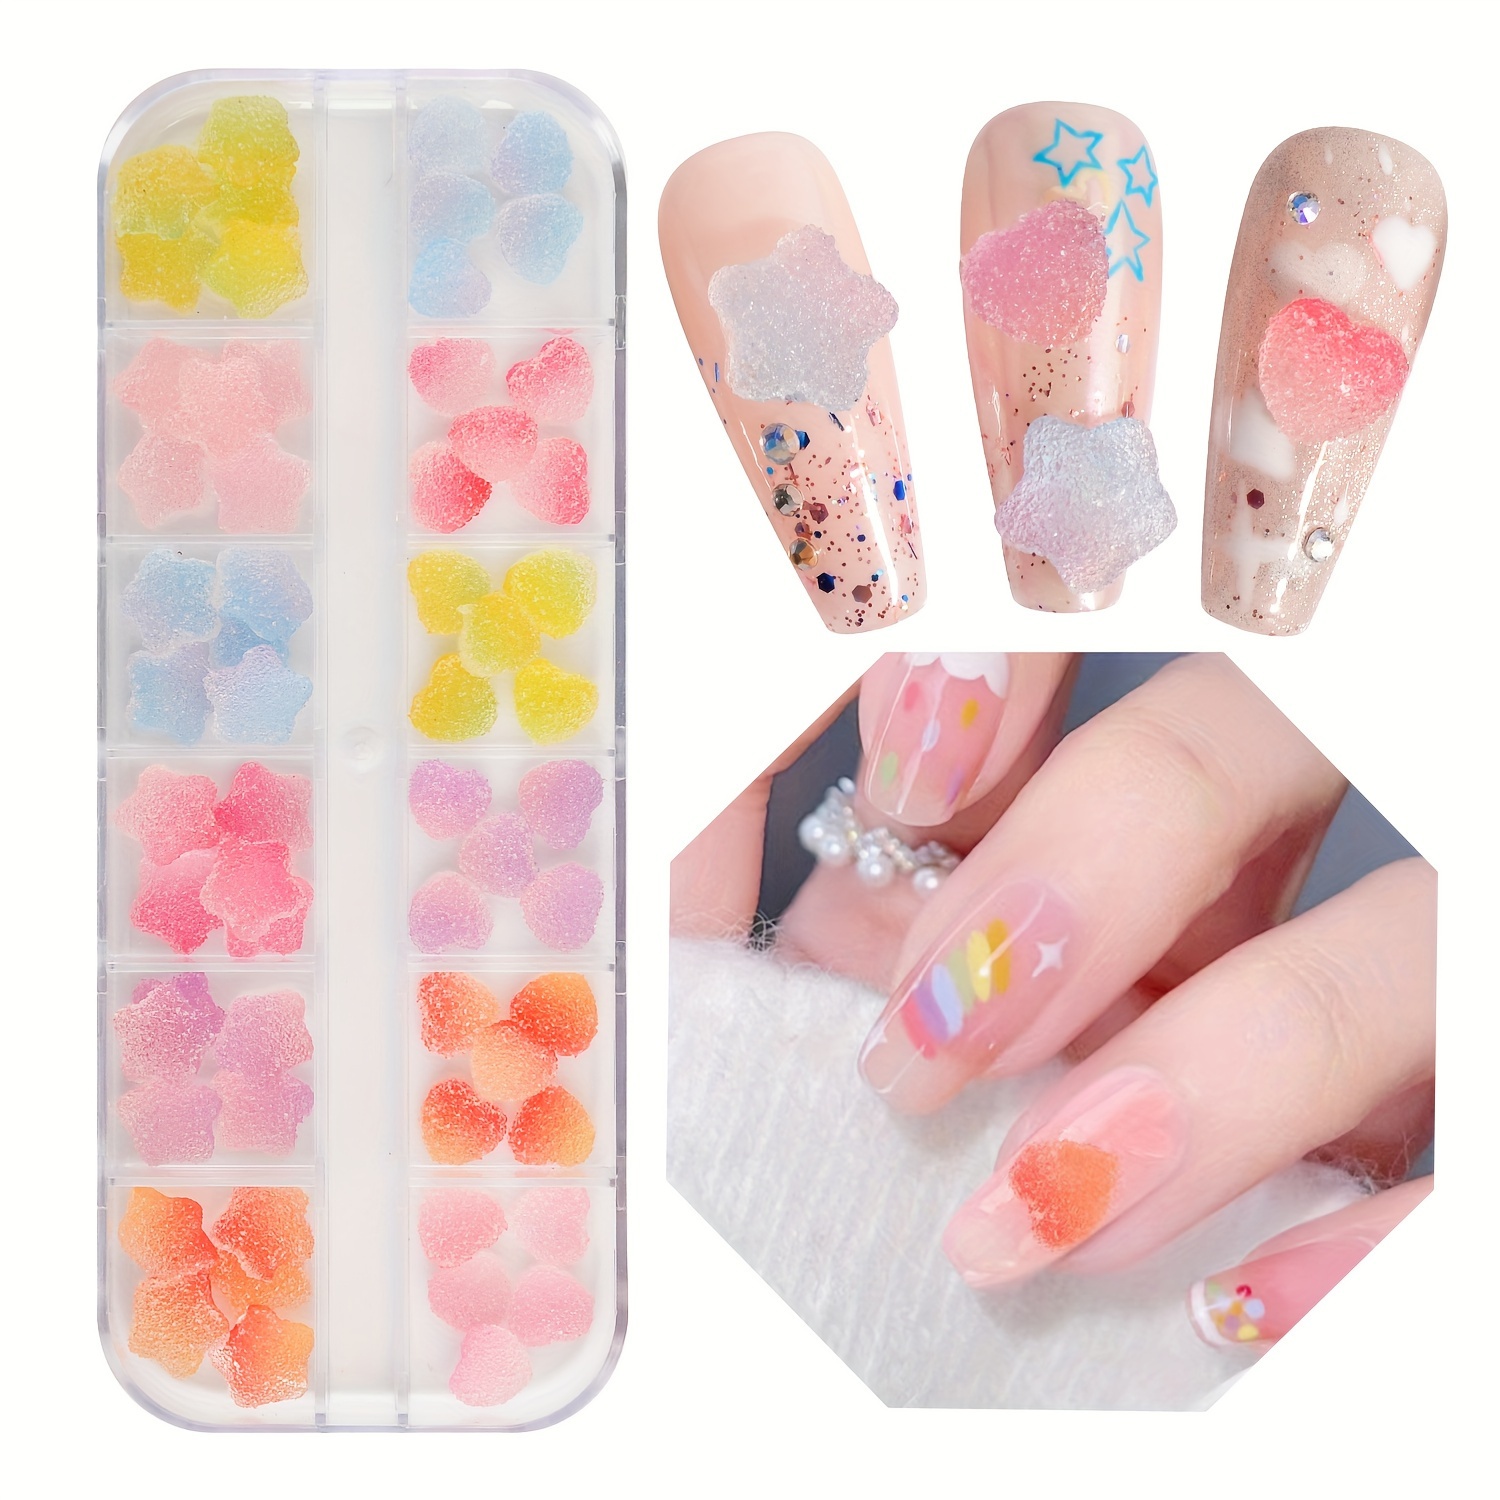 Flatback Pearl Nail Gems - Resin Pearls Nail Beads Manicure Decoration 1pc  Sets